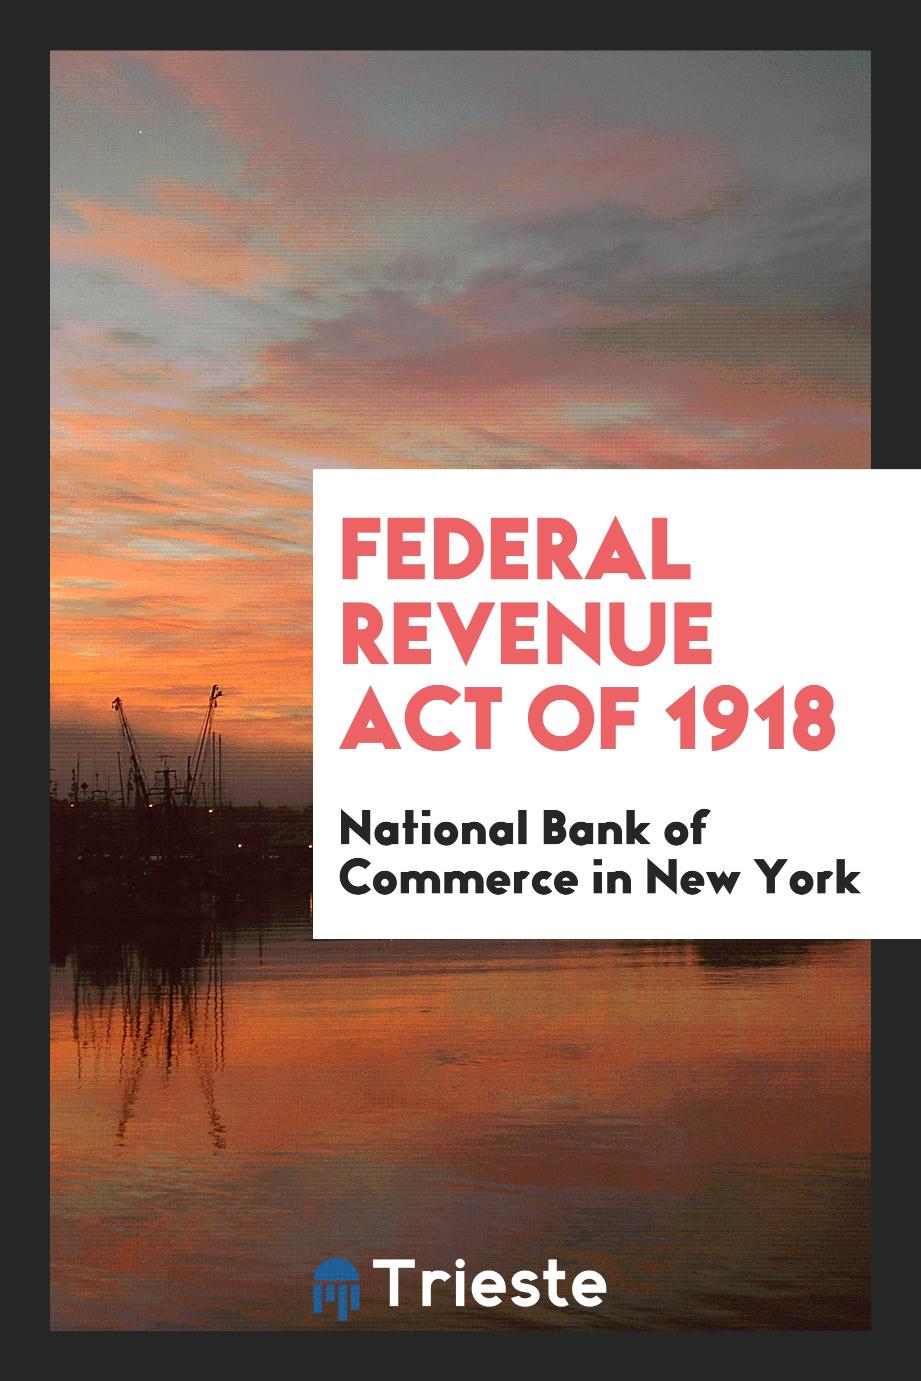 Federal revenue act of 1918